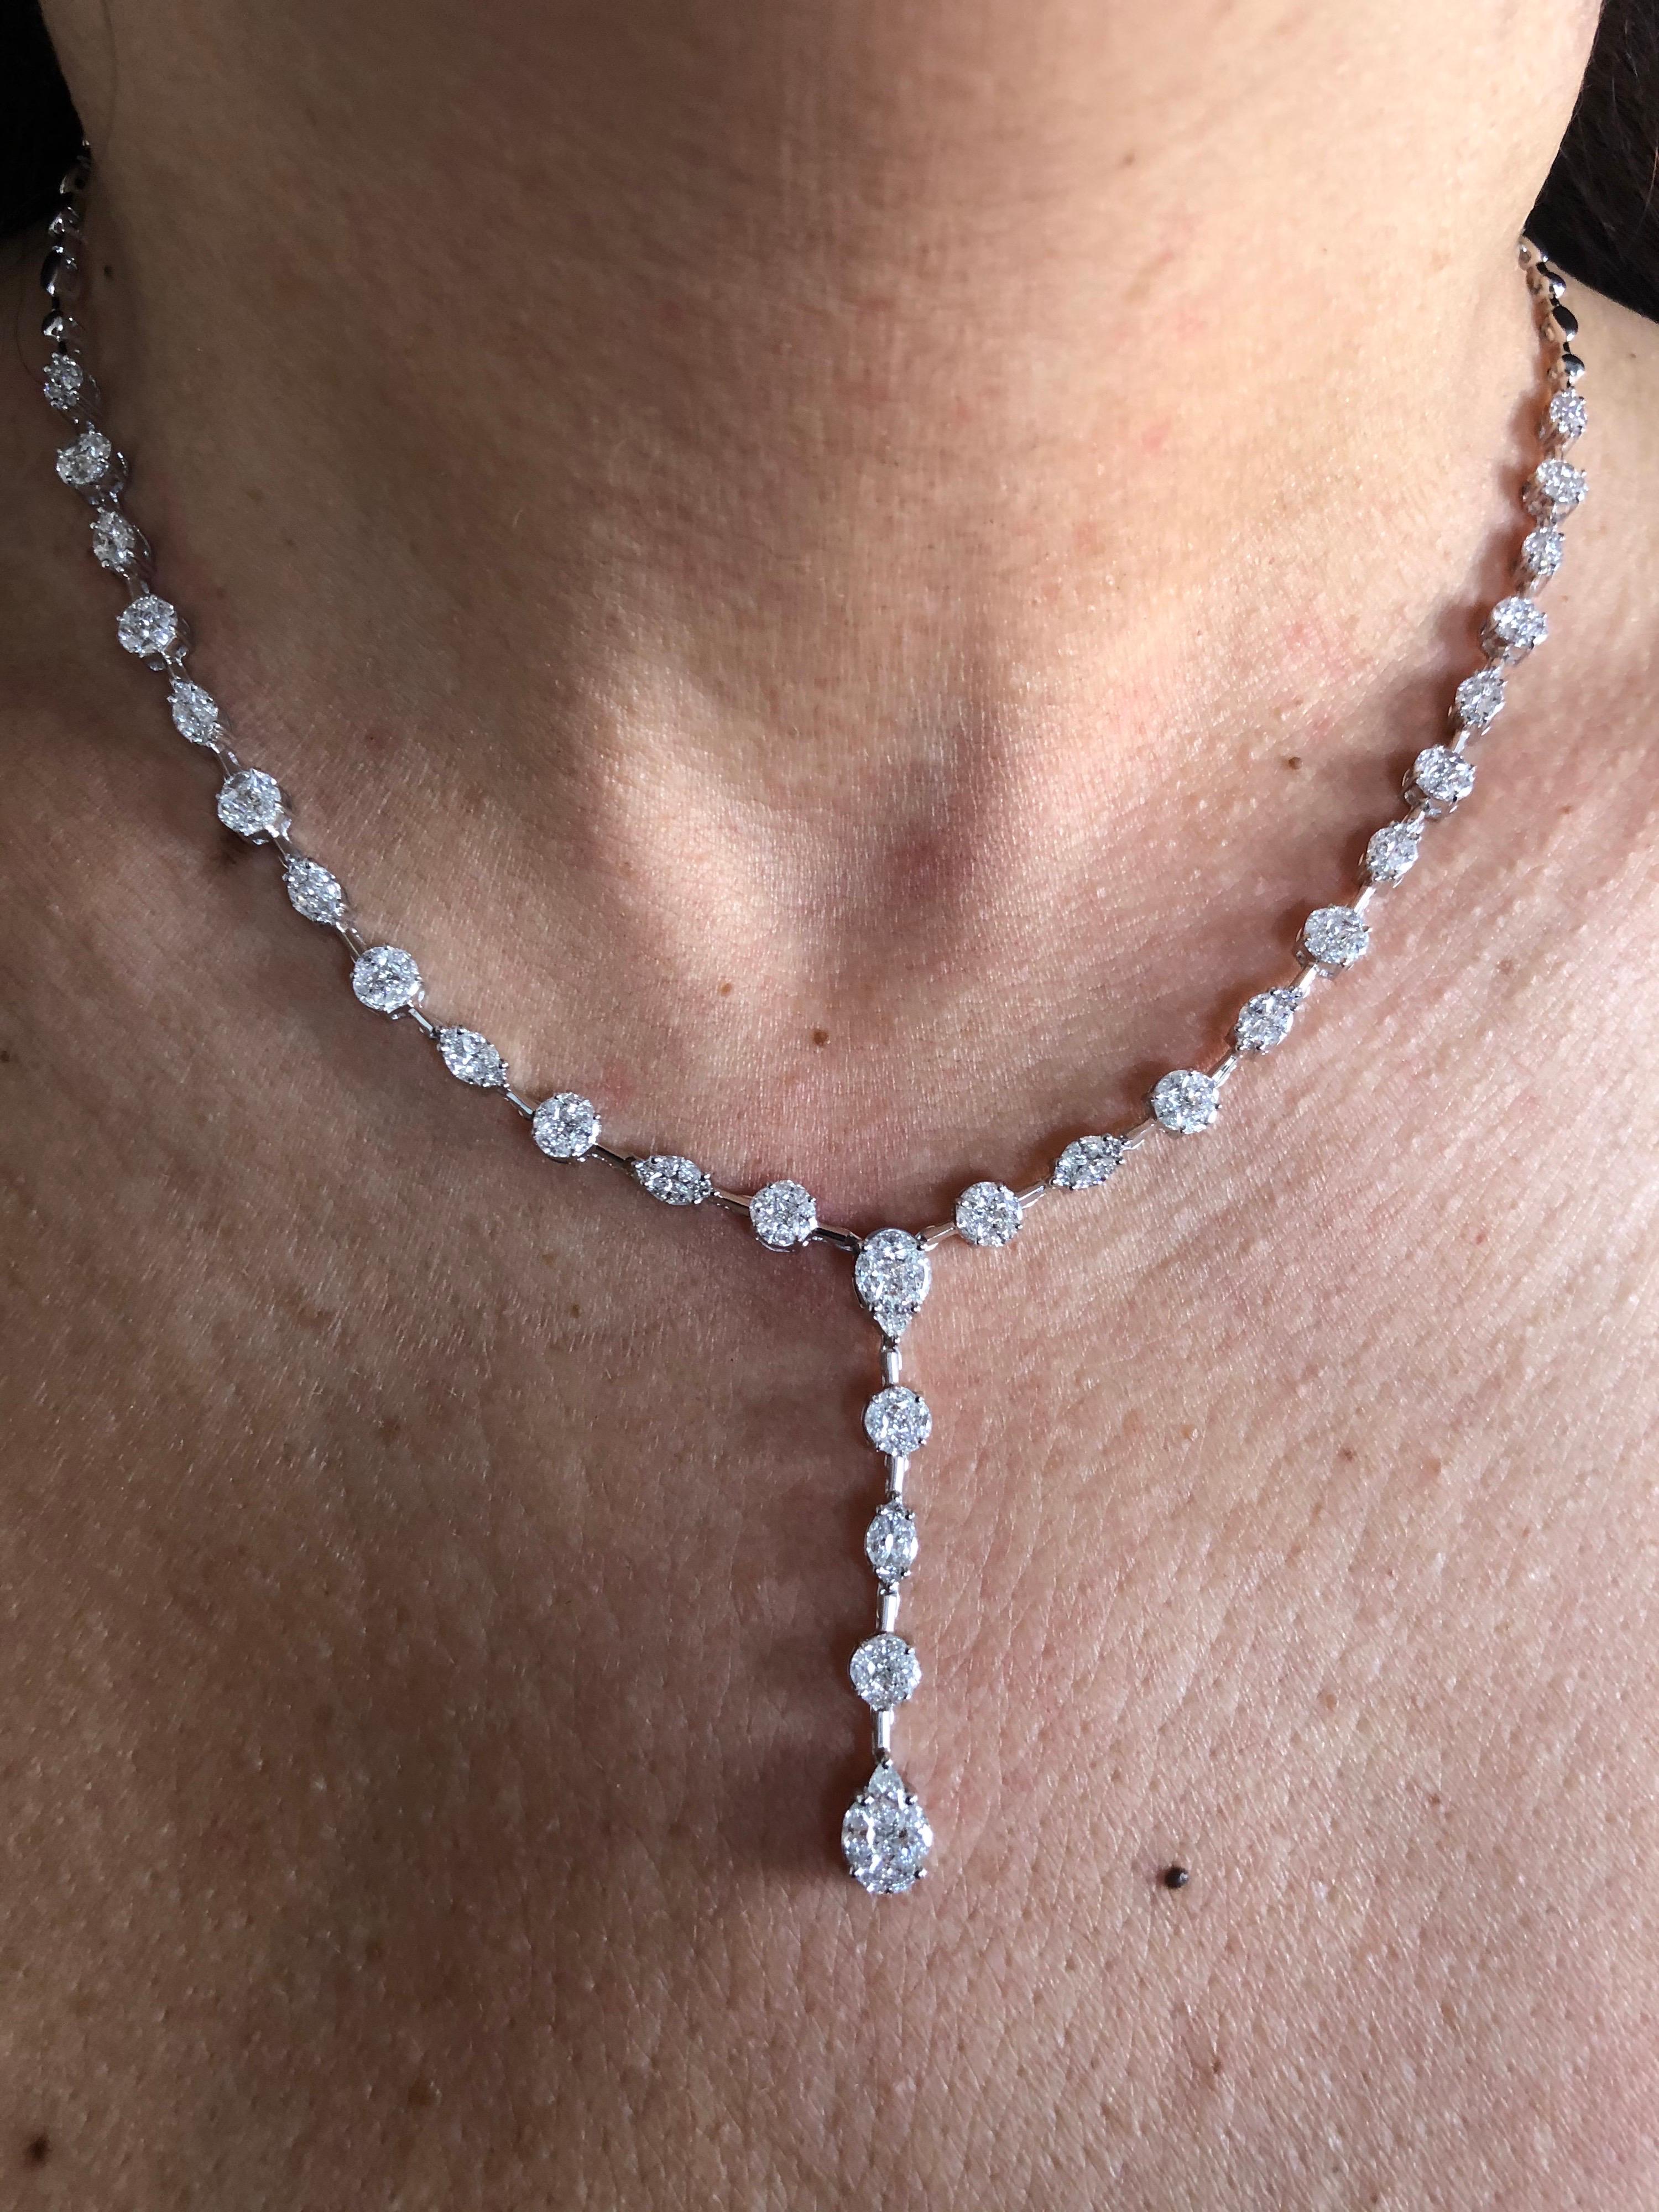 Multi cut stones that create the illusion of single round, pear and marquise shaped diamond, set in 18K white gold. The necklace is set with diamonds half way and is 17 inches in length, with an adjustable piece to make 16 inch. Total carat weight